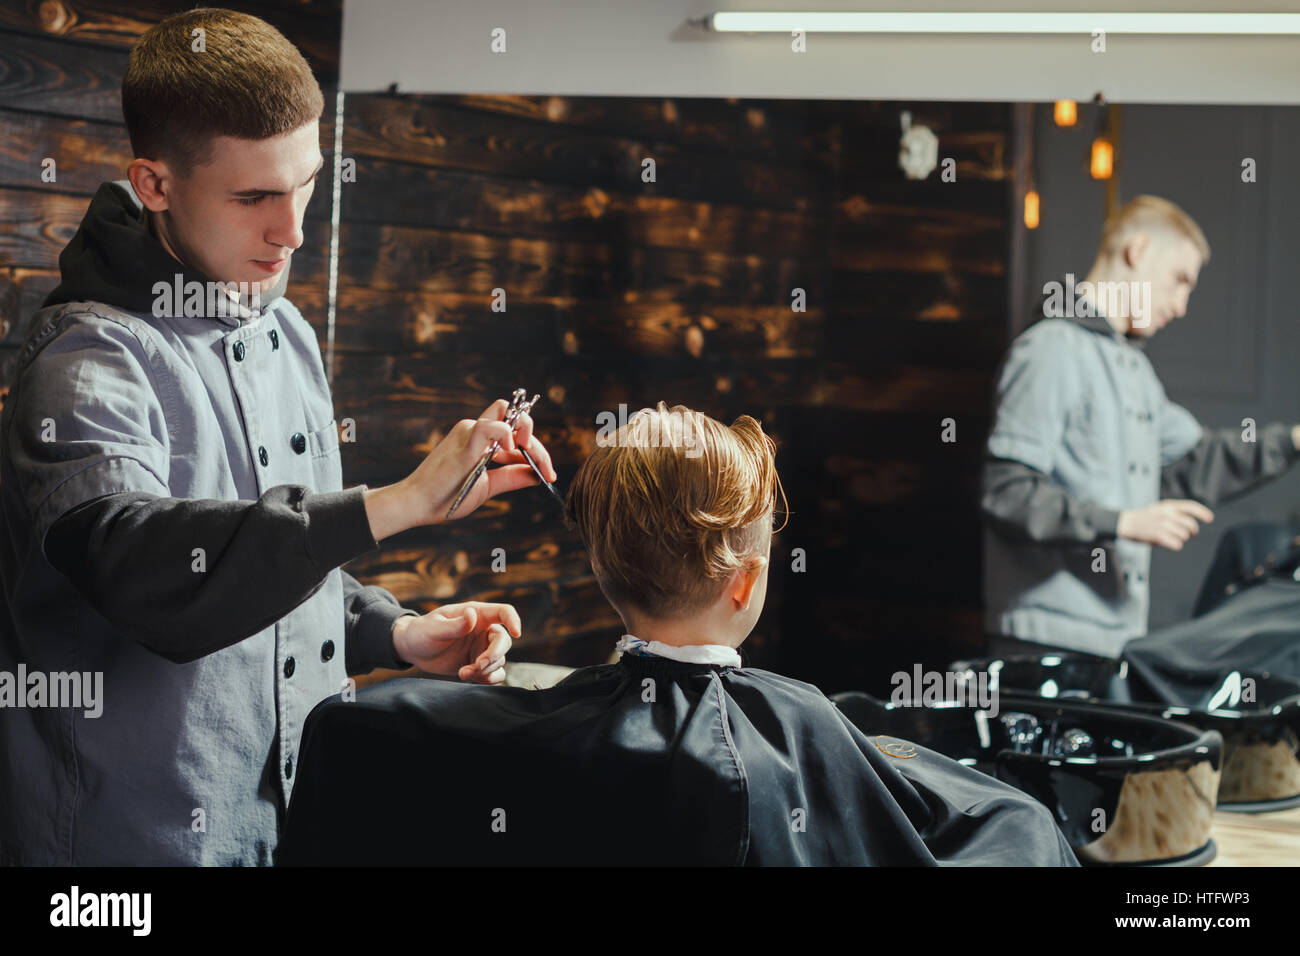 Little Boy Getting Haircut By Barber While Sitting In Chair At Barbershop. Barbershop Theme Stock Photo